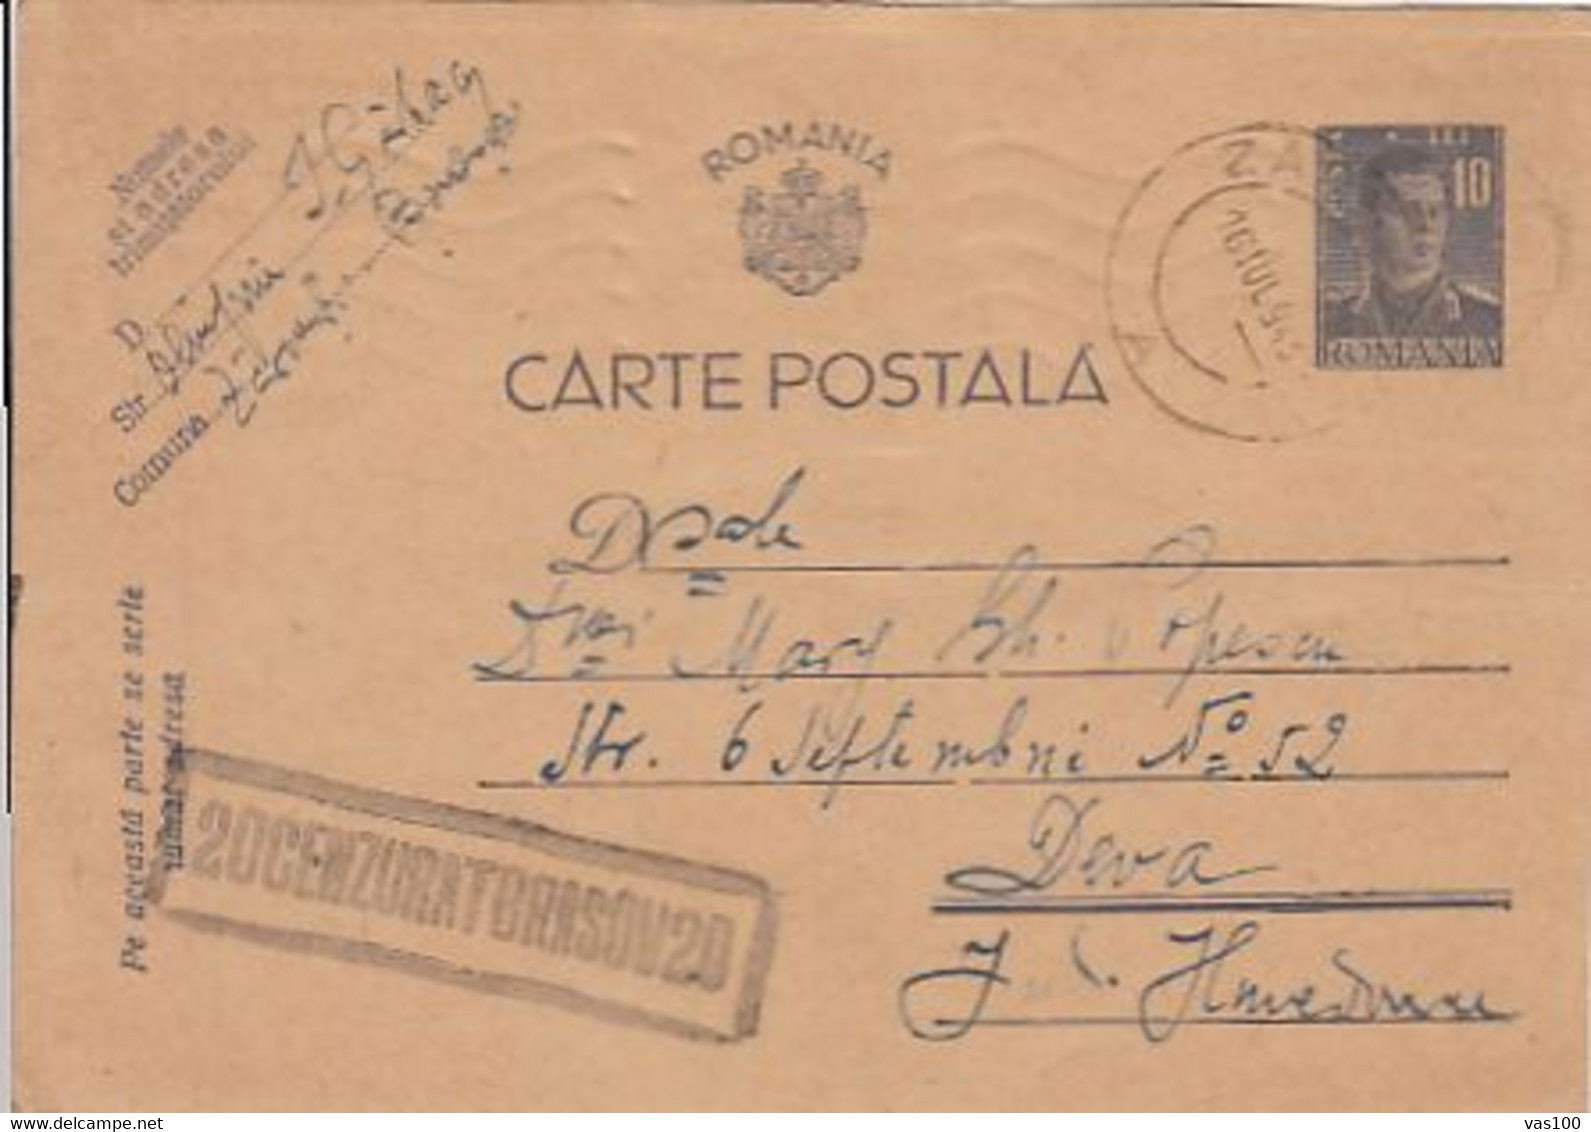 WW2 LETTERS, CENSORED BRASOV NR 20, KING MICHAEL PC STATIONERY, ENTIER POSTAL, 1943, ROMANIA - World War 2 Letters